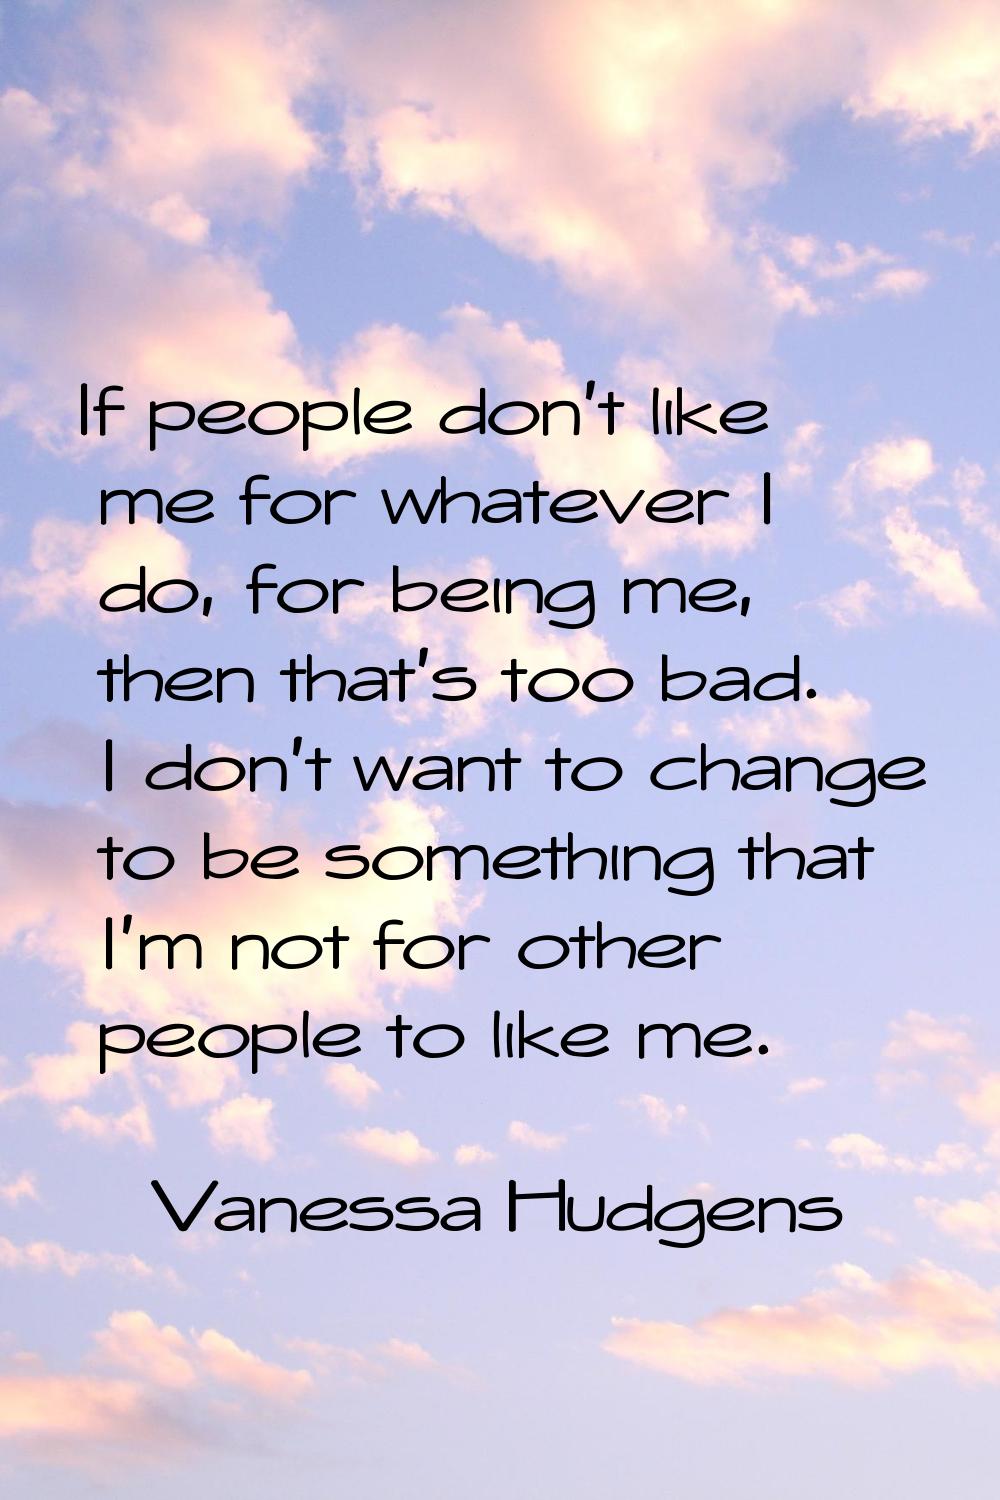 If people don't like me for whatever I do, for being me, then that's too bad. I don't want to chang